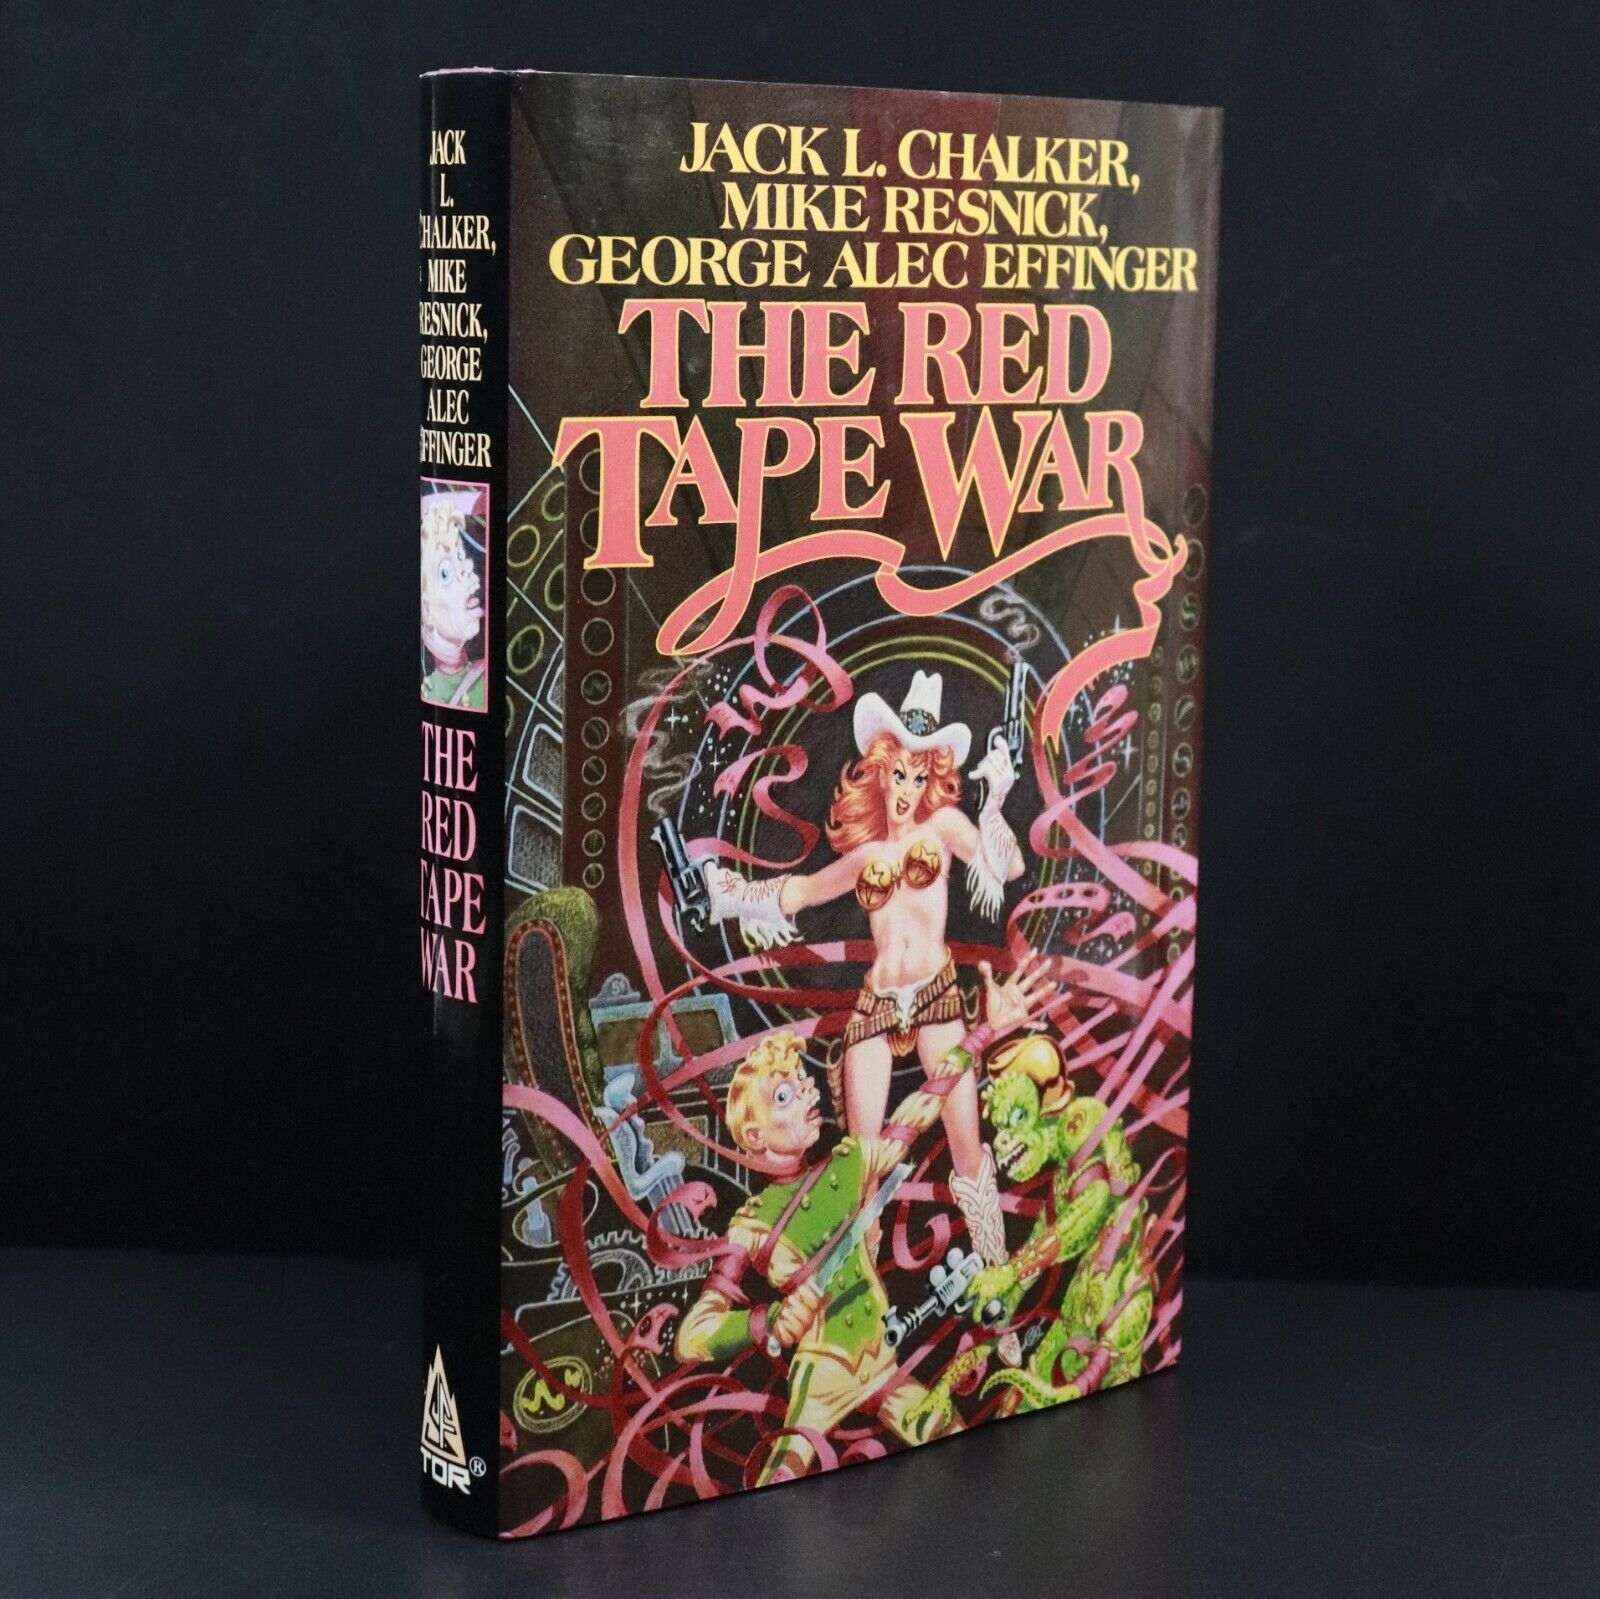 1991 The Red Tape War by JL Chalker Science Fiction Book 1st Edition Resnick